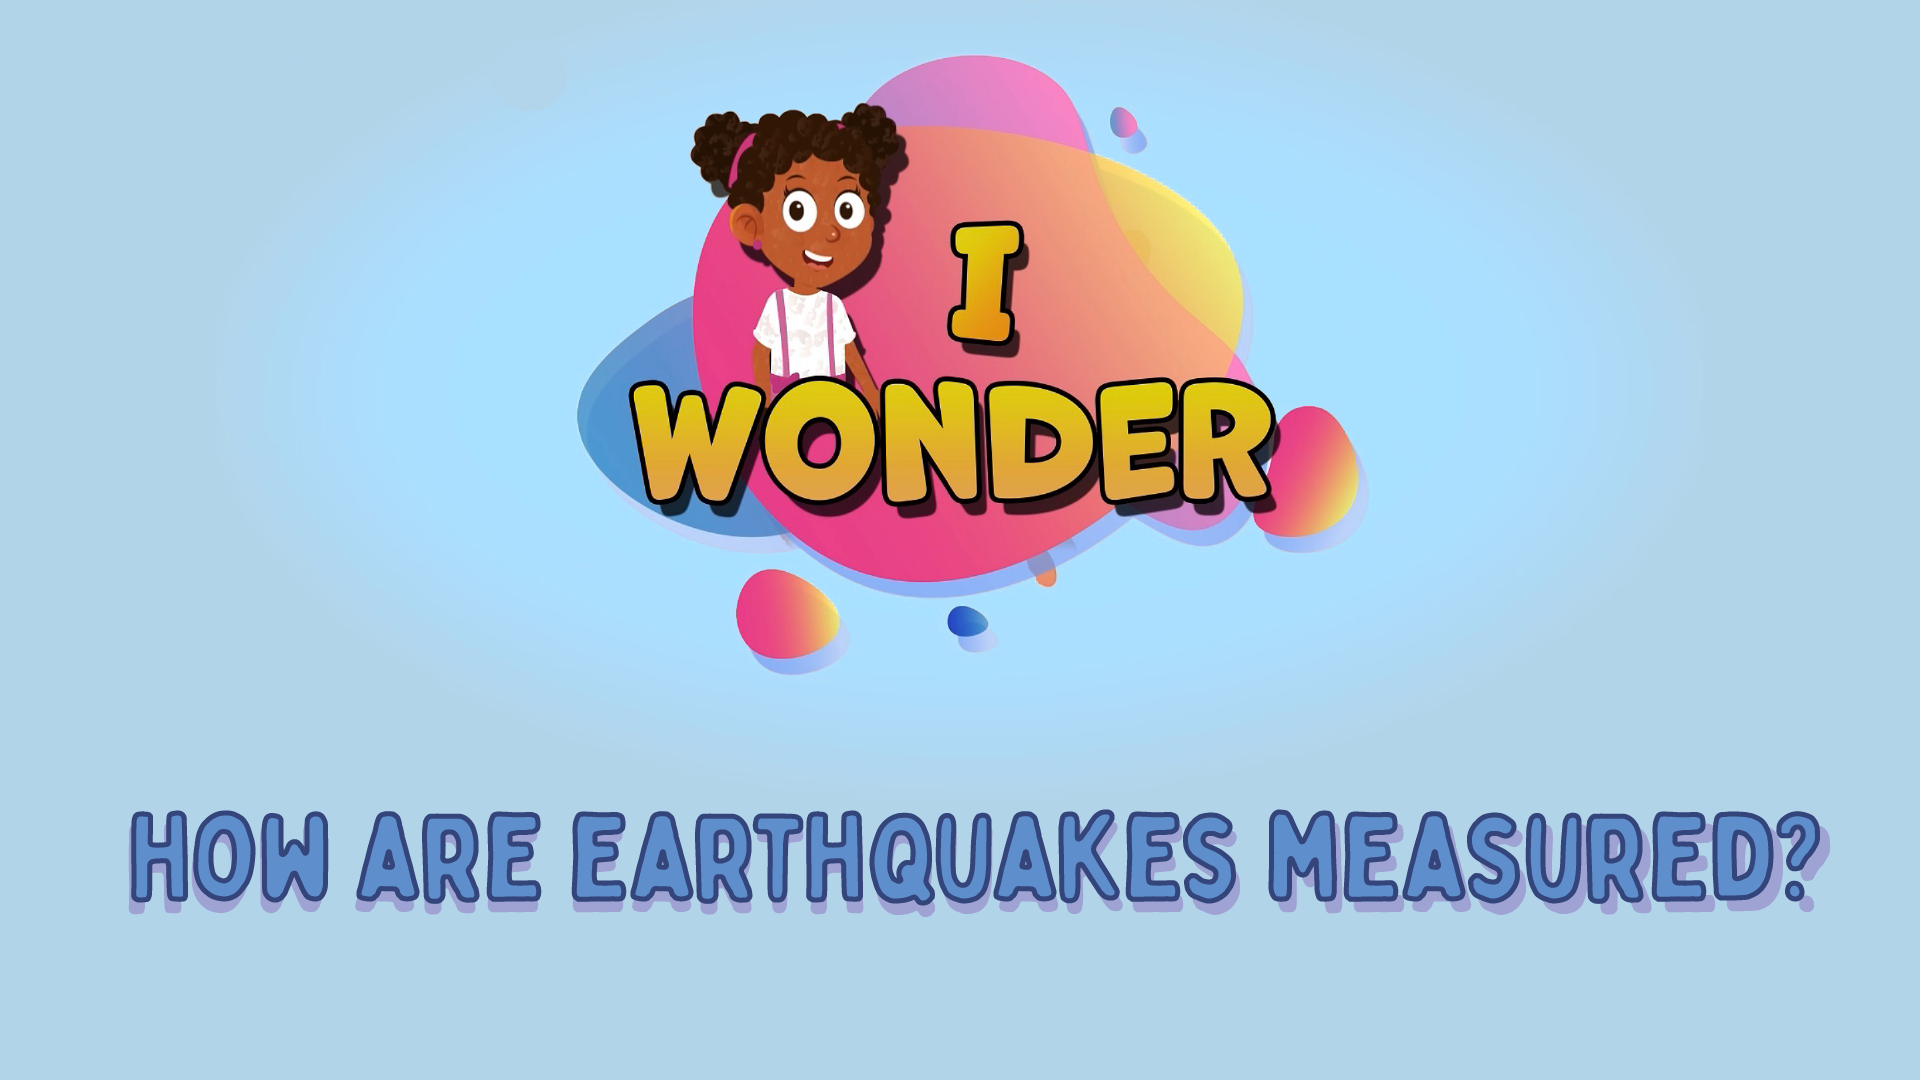 How Are Earthquakes Measured?